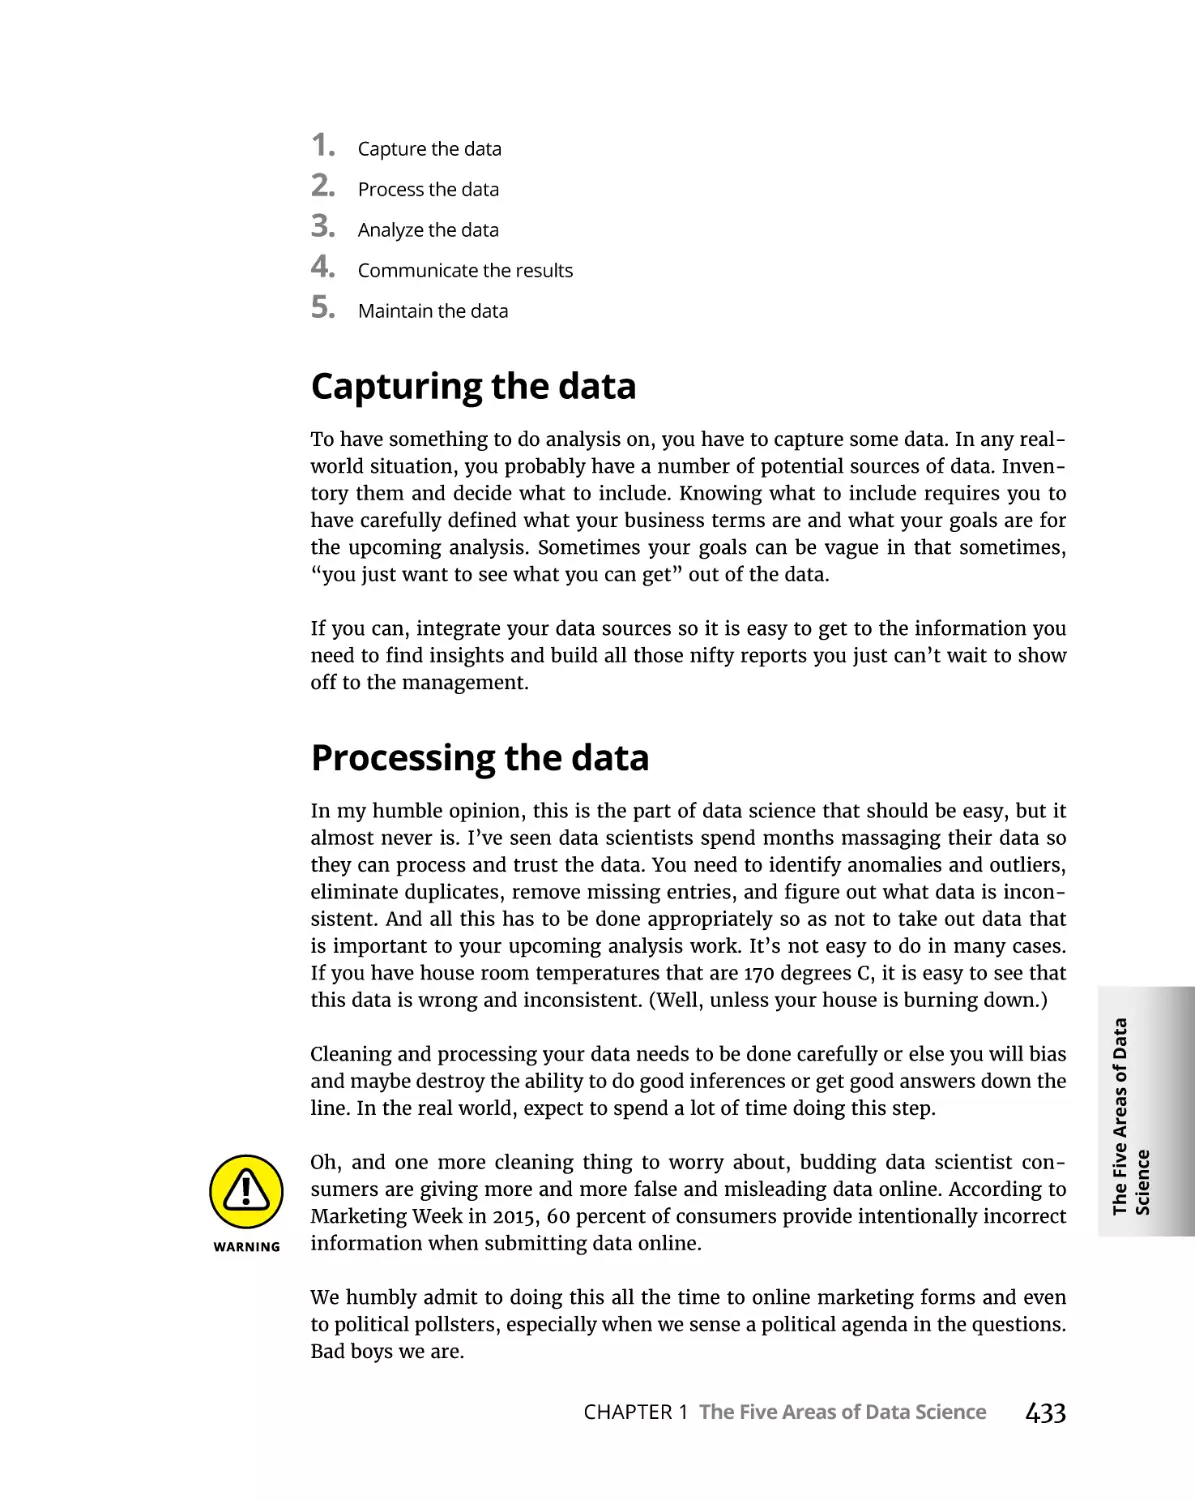 Capturing the data
Processing the data